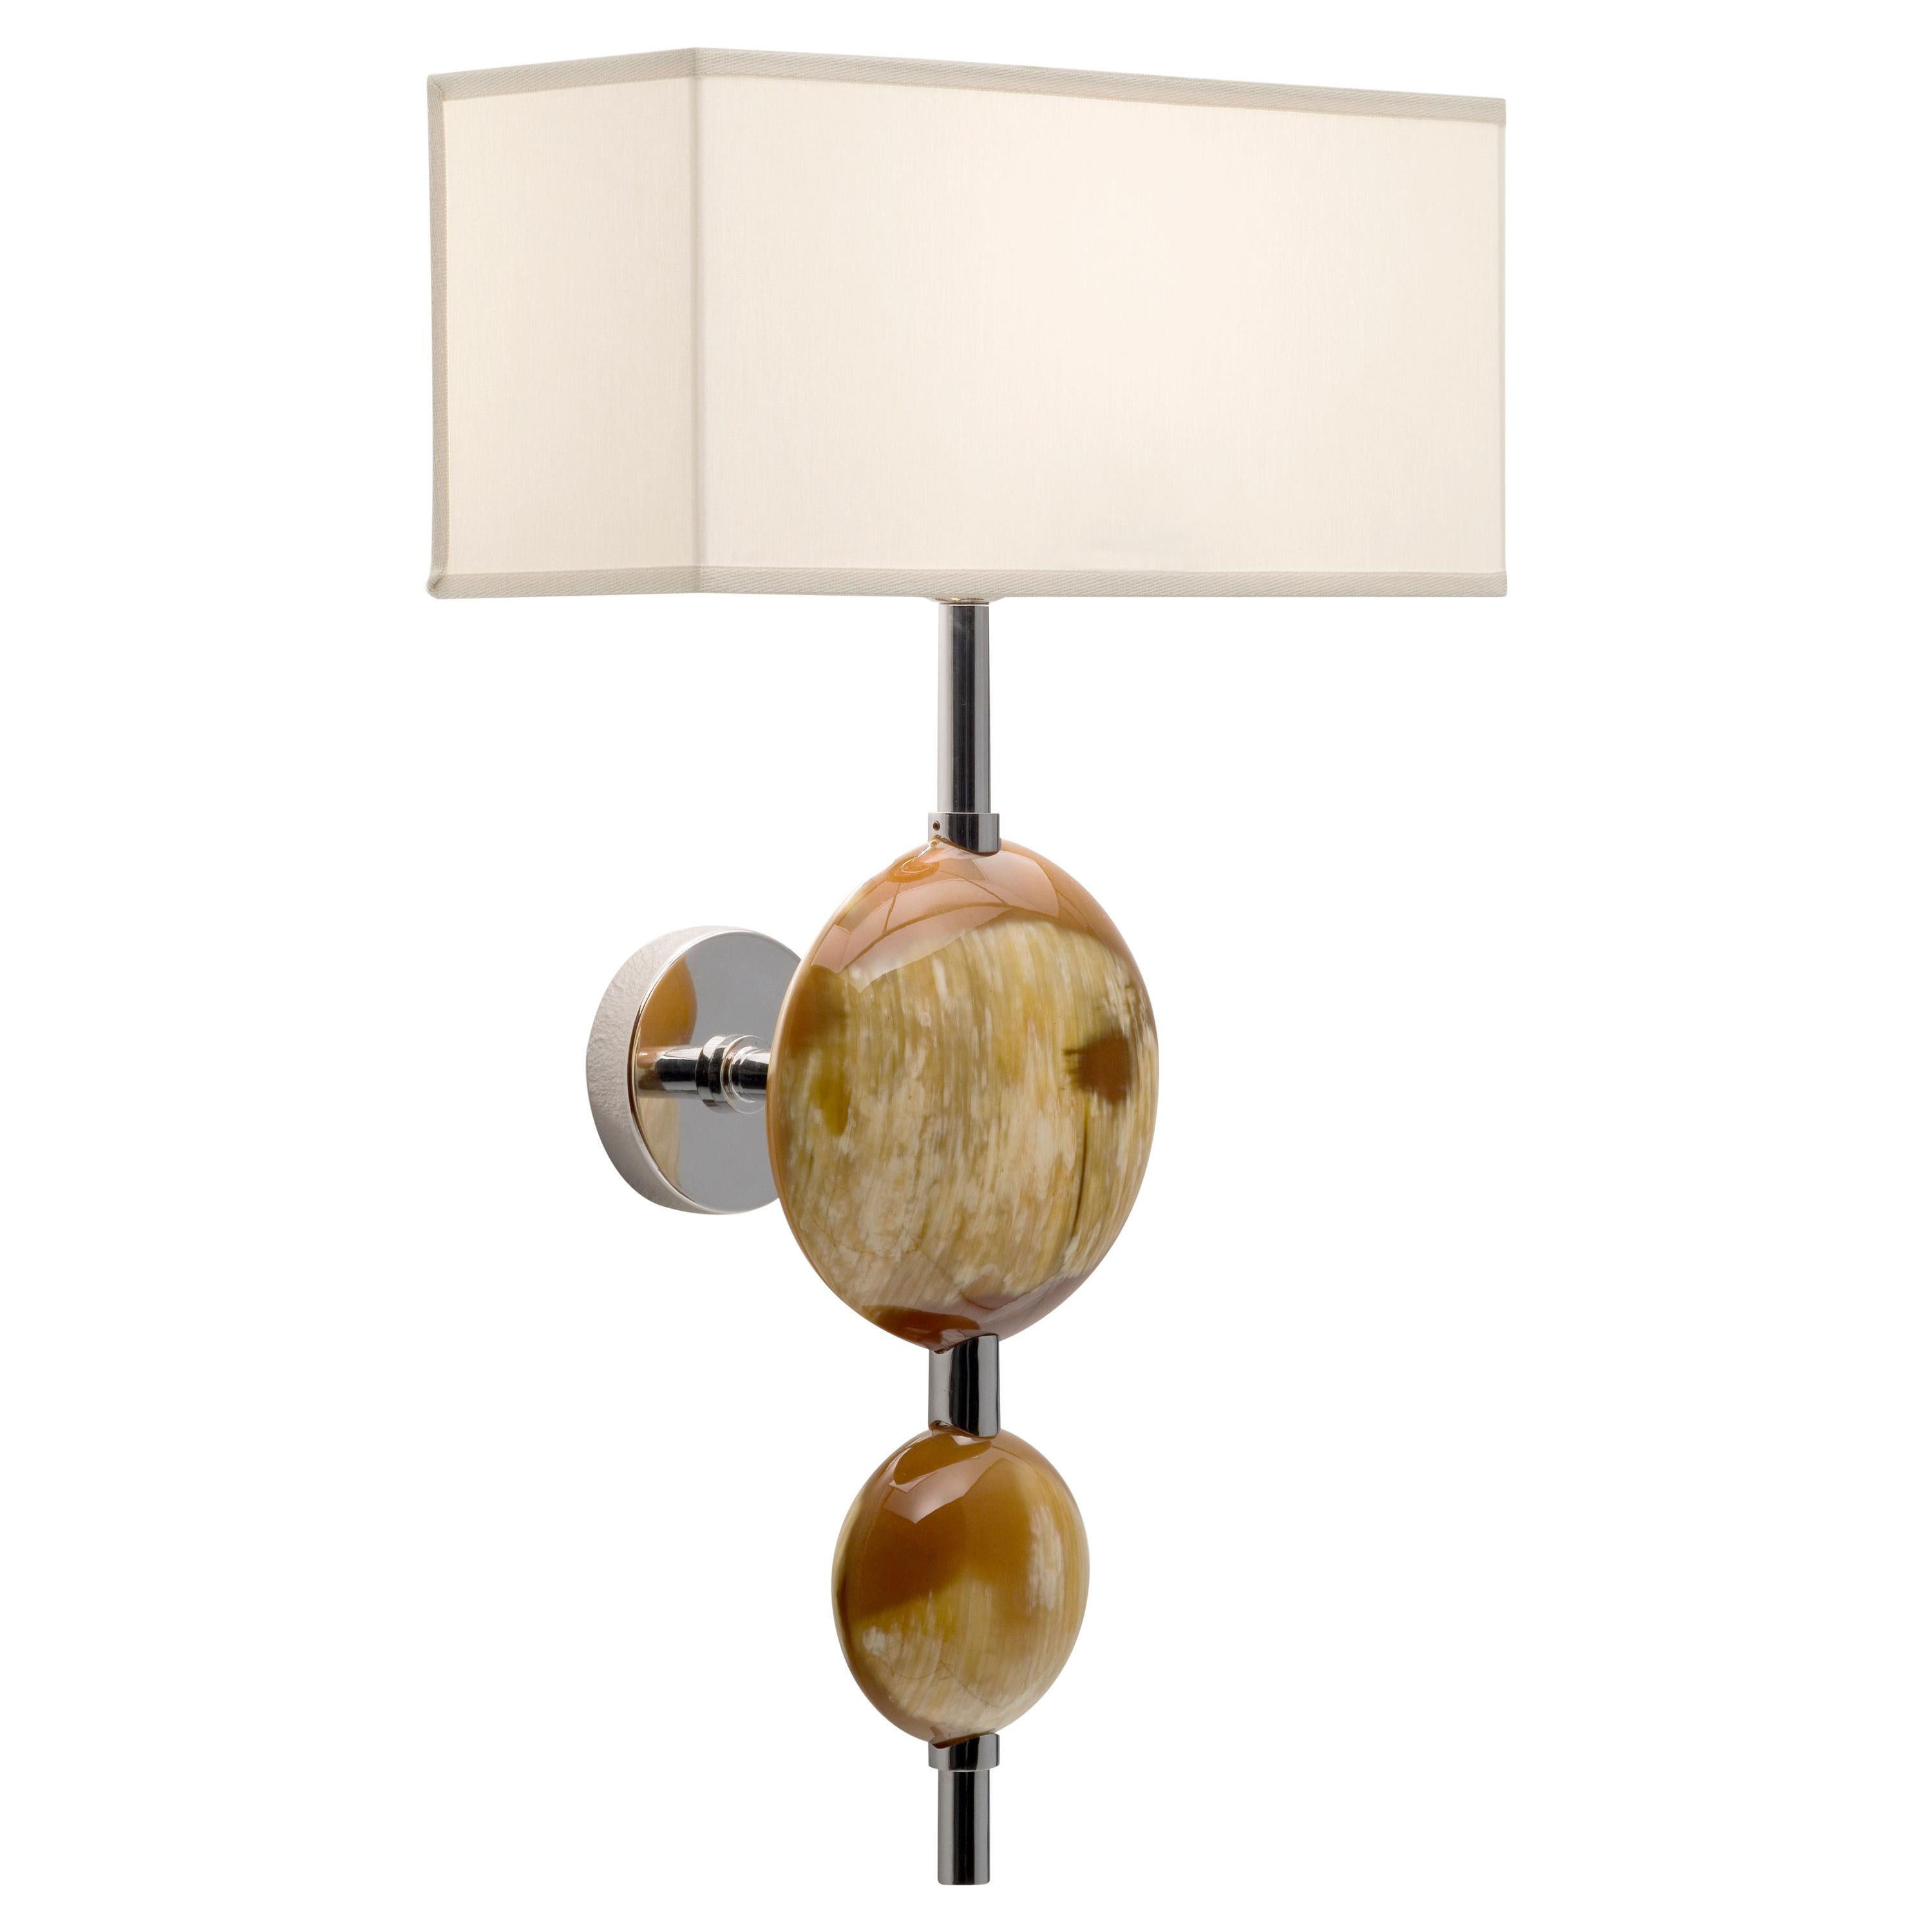 Arcahorn Vittoria Wall Sconce in Horn & Stainless Steel by Filippo Dini For Sale